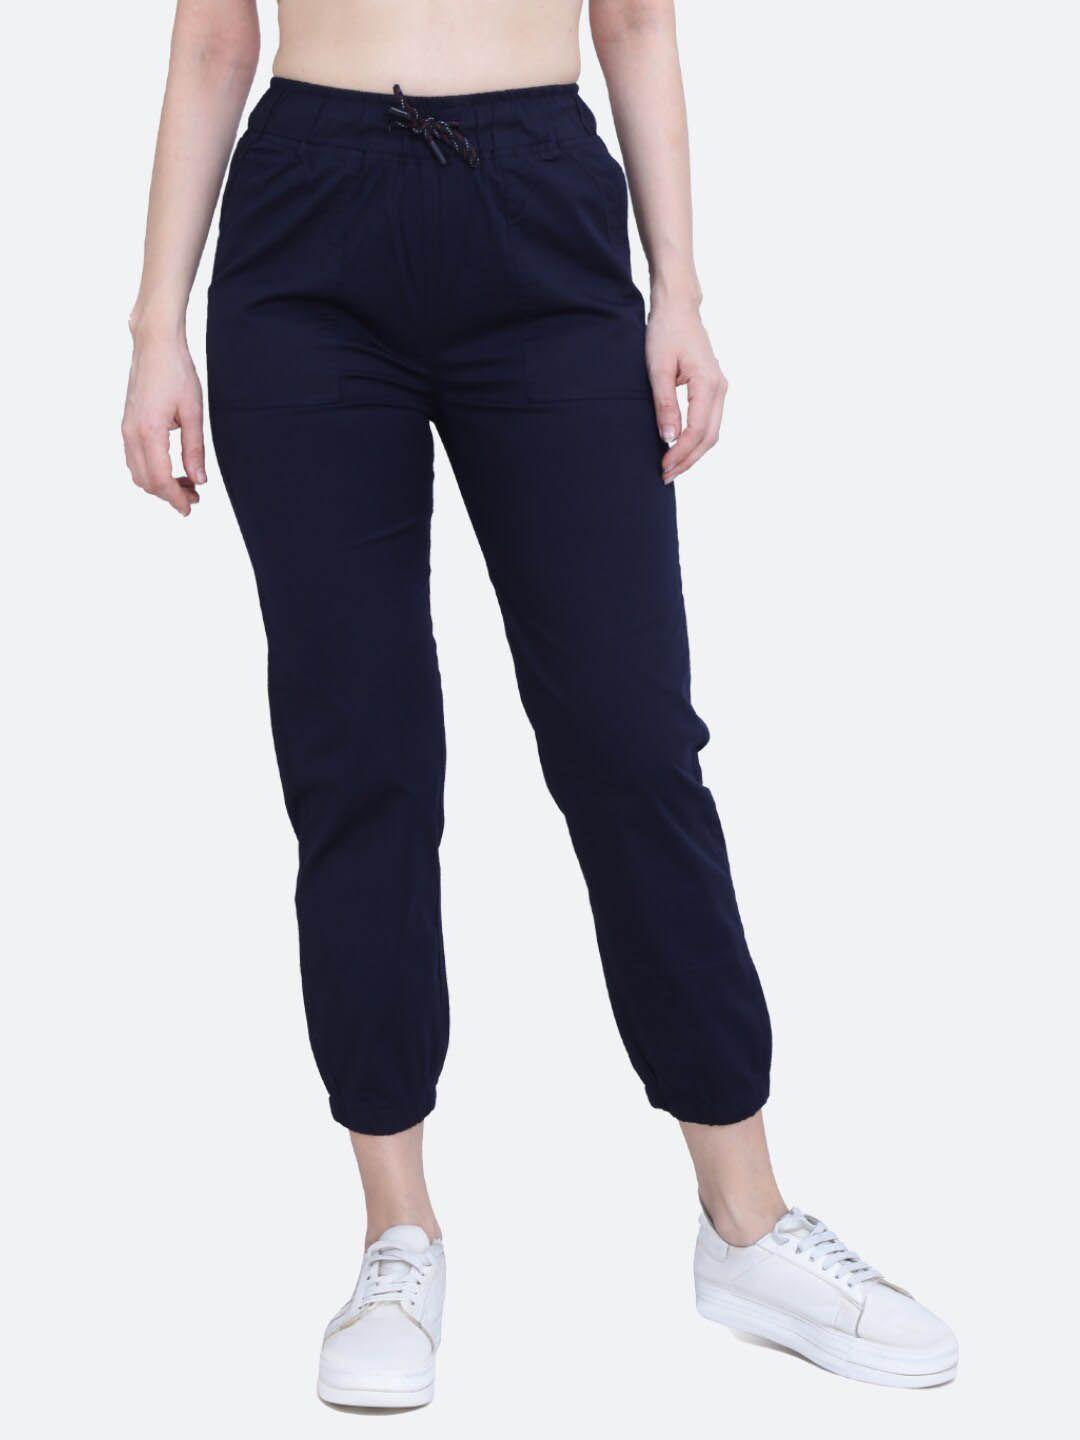 fck-3 women high rise relaxed fit joggers